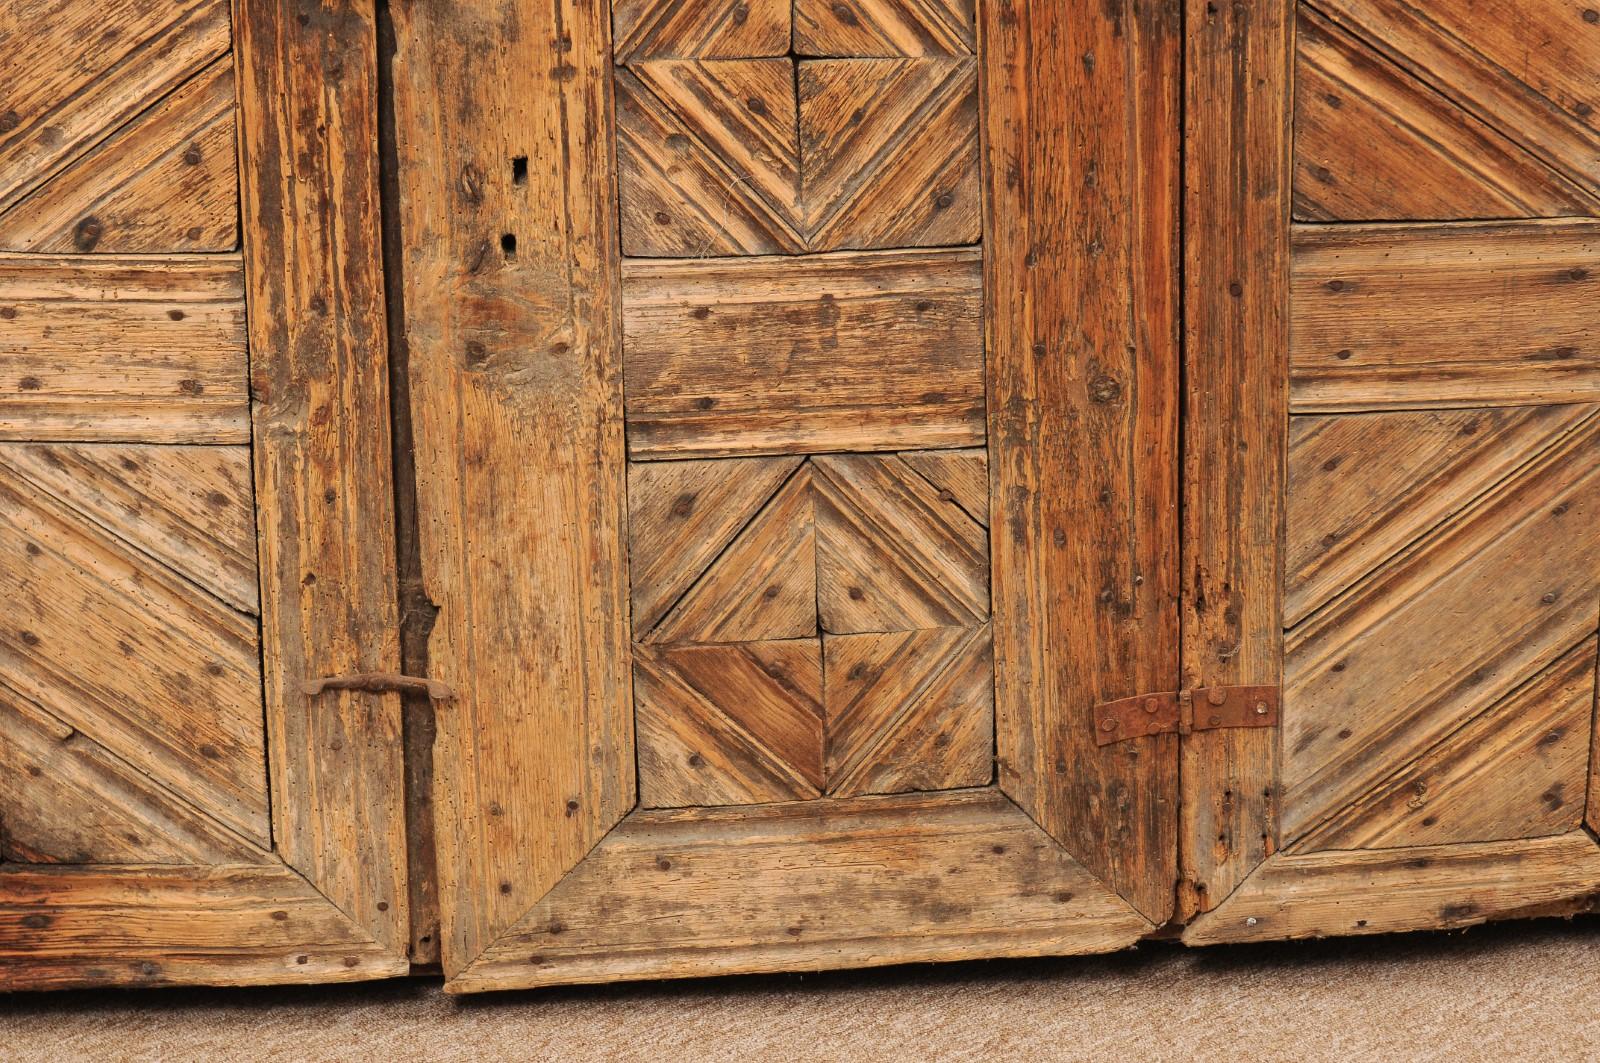 17th Century Spanish Pine cabinet with 2 drawers & open shelf above Cabinet Door, Pyrenees.